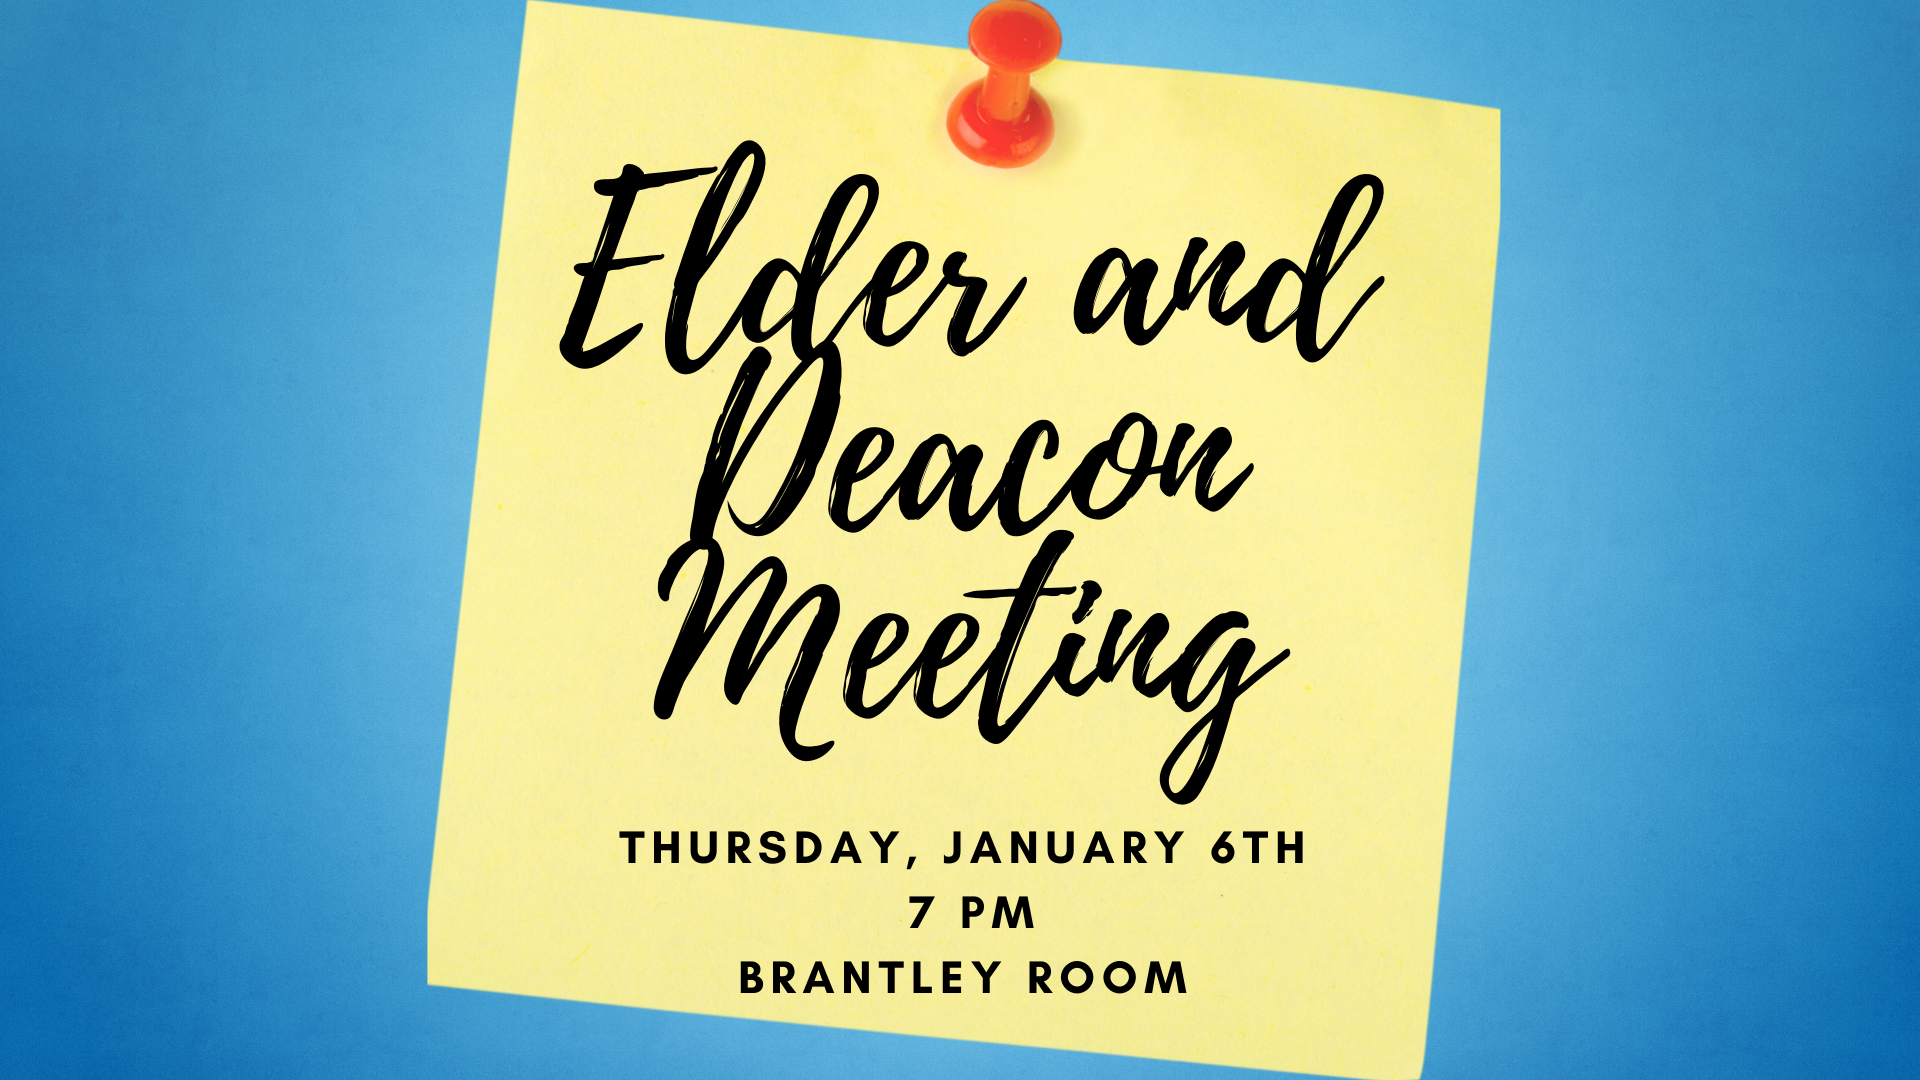 Elder and Deacon Meeting Edited Web image